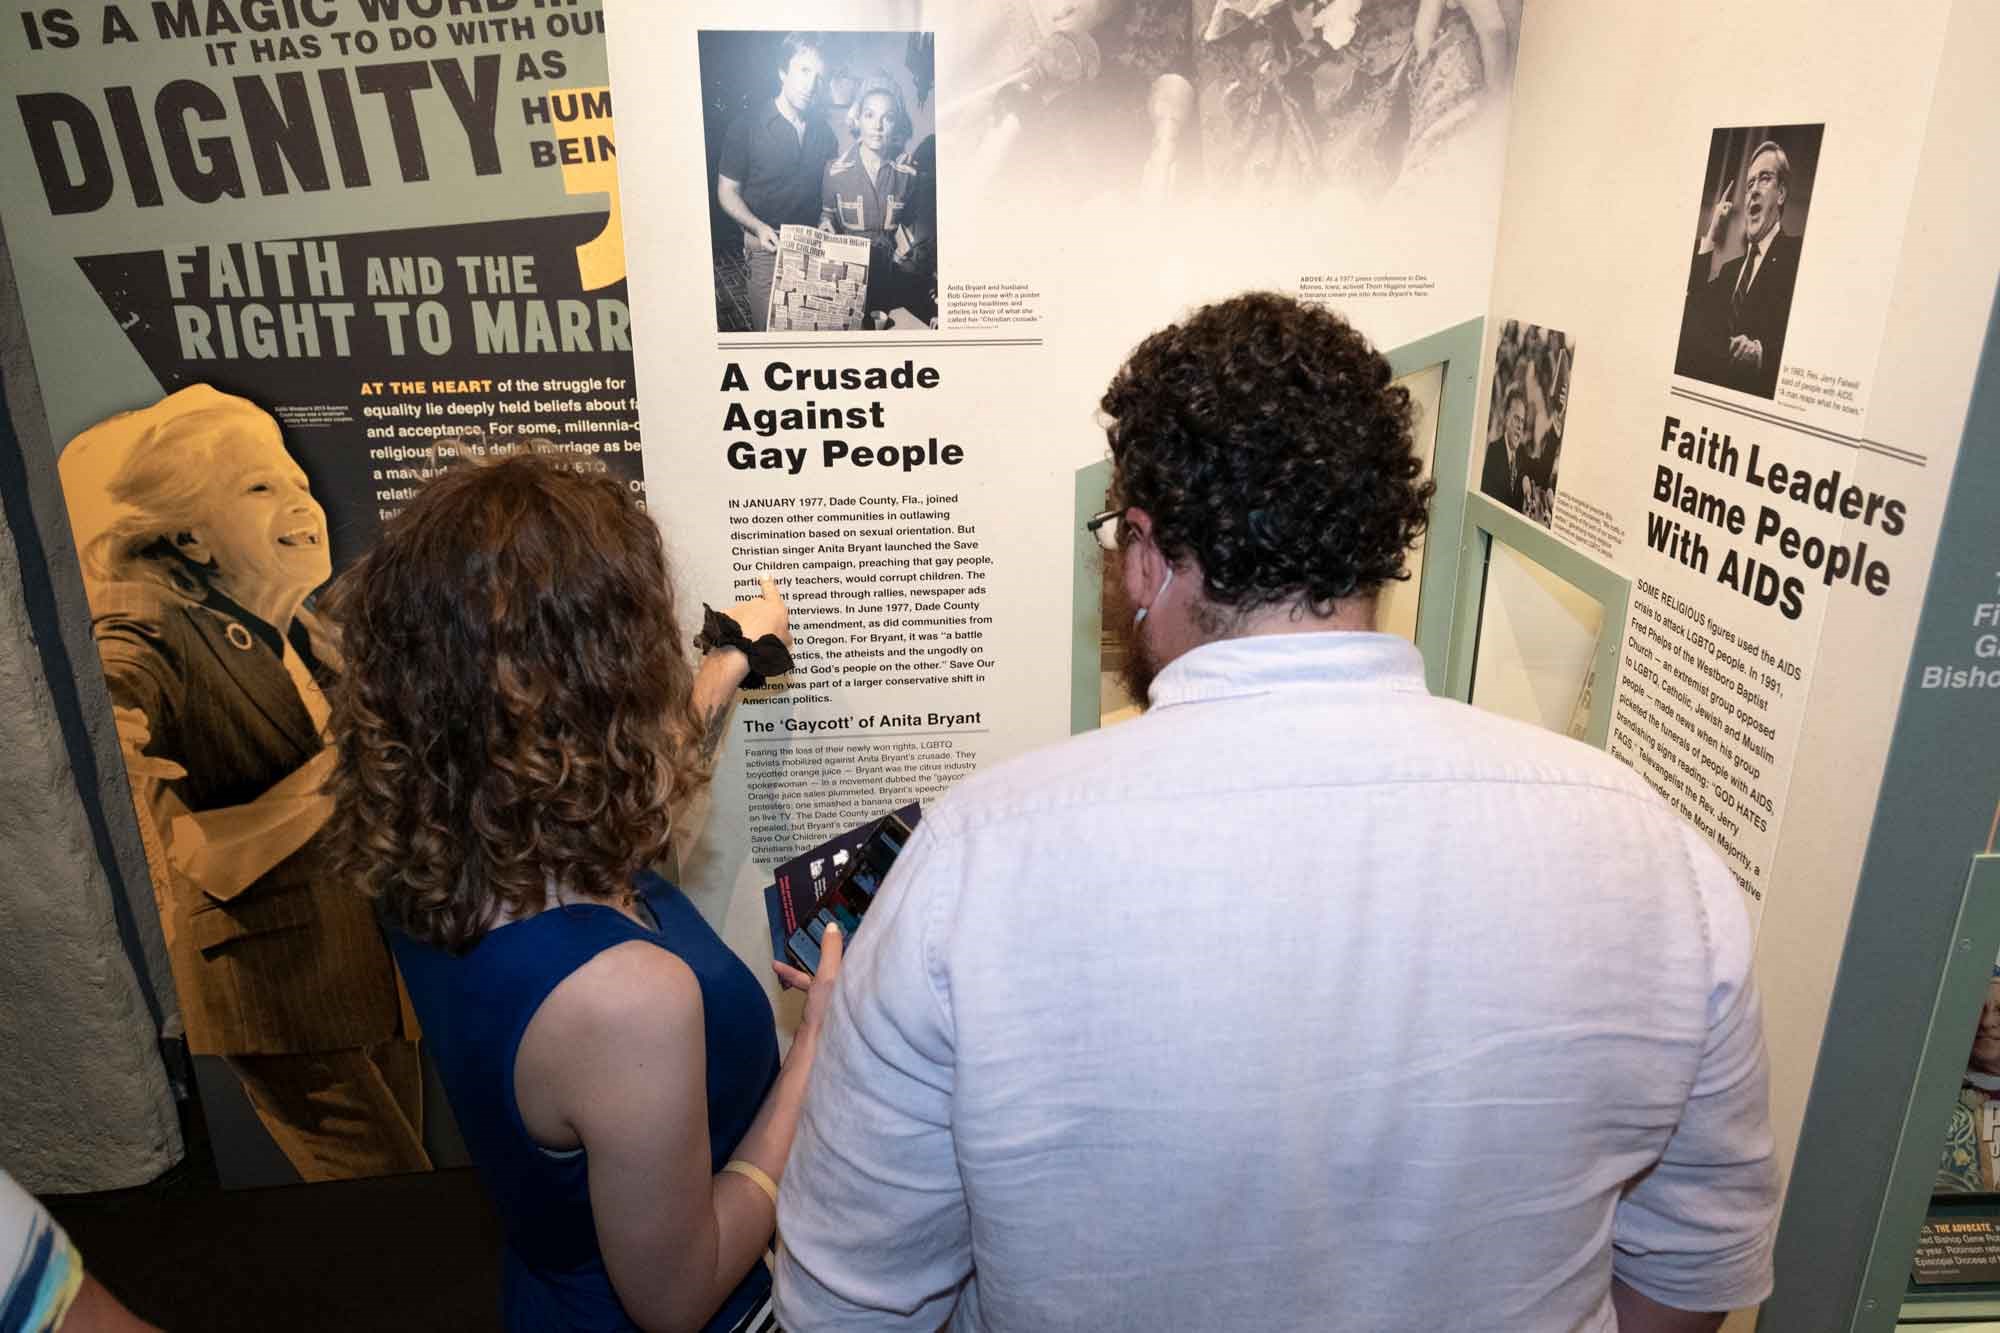 Rise Up Stonewall and the LGBTQ Rights Movement at MoPOP